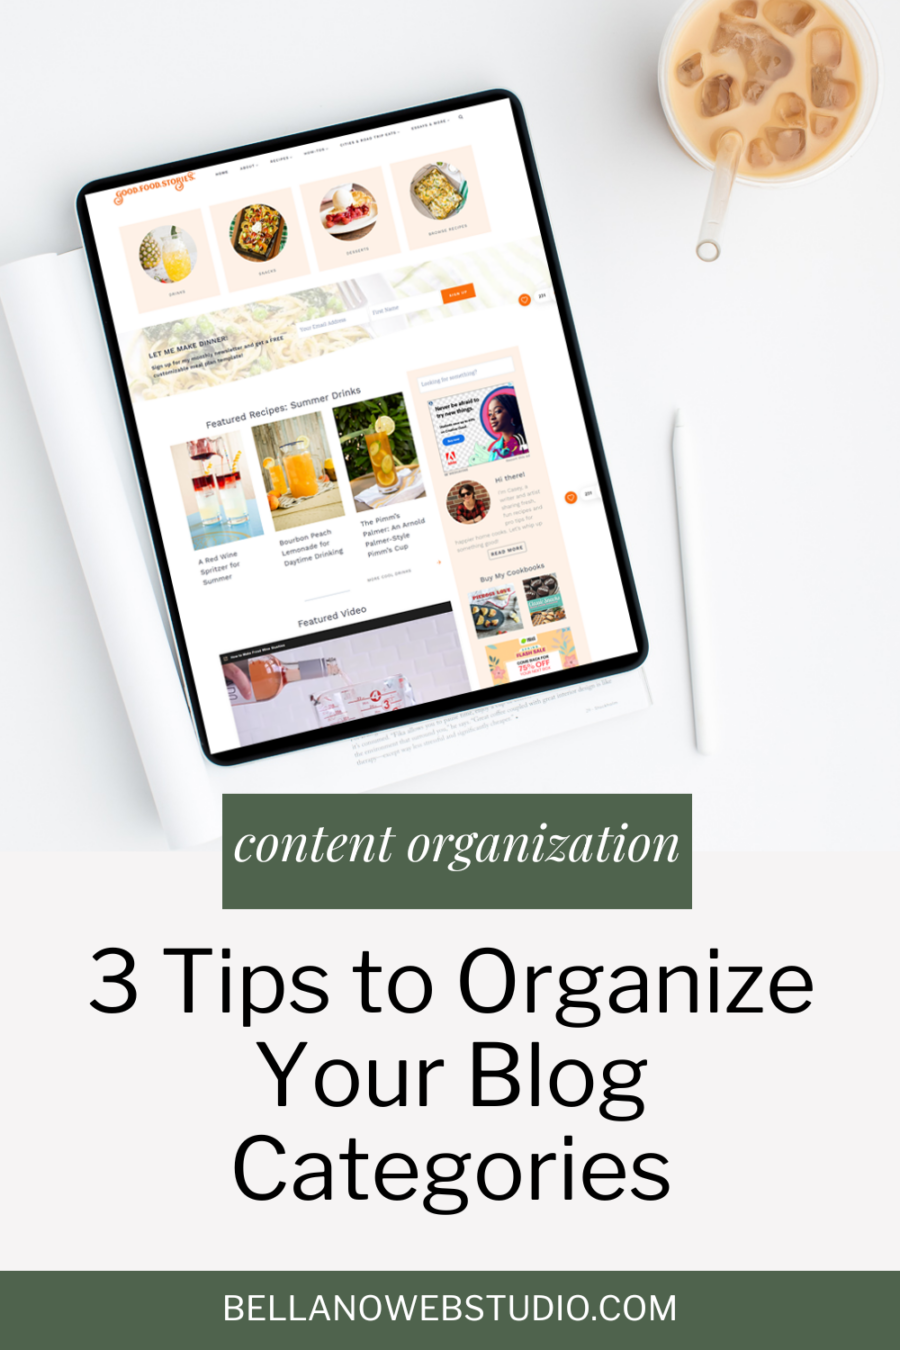 Tips to Organize Your Blog Categories